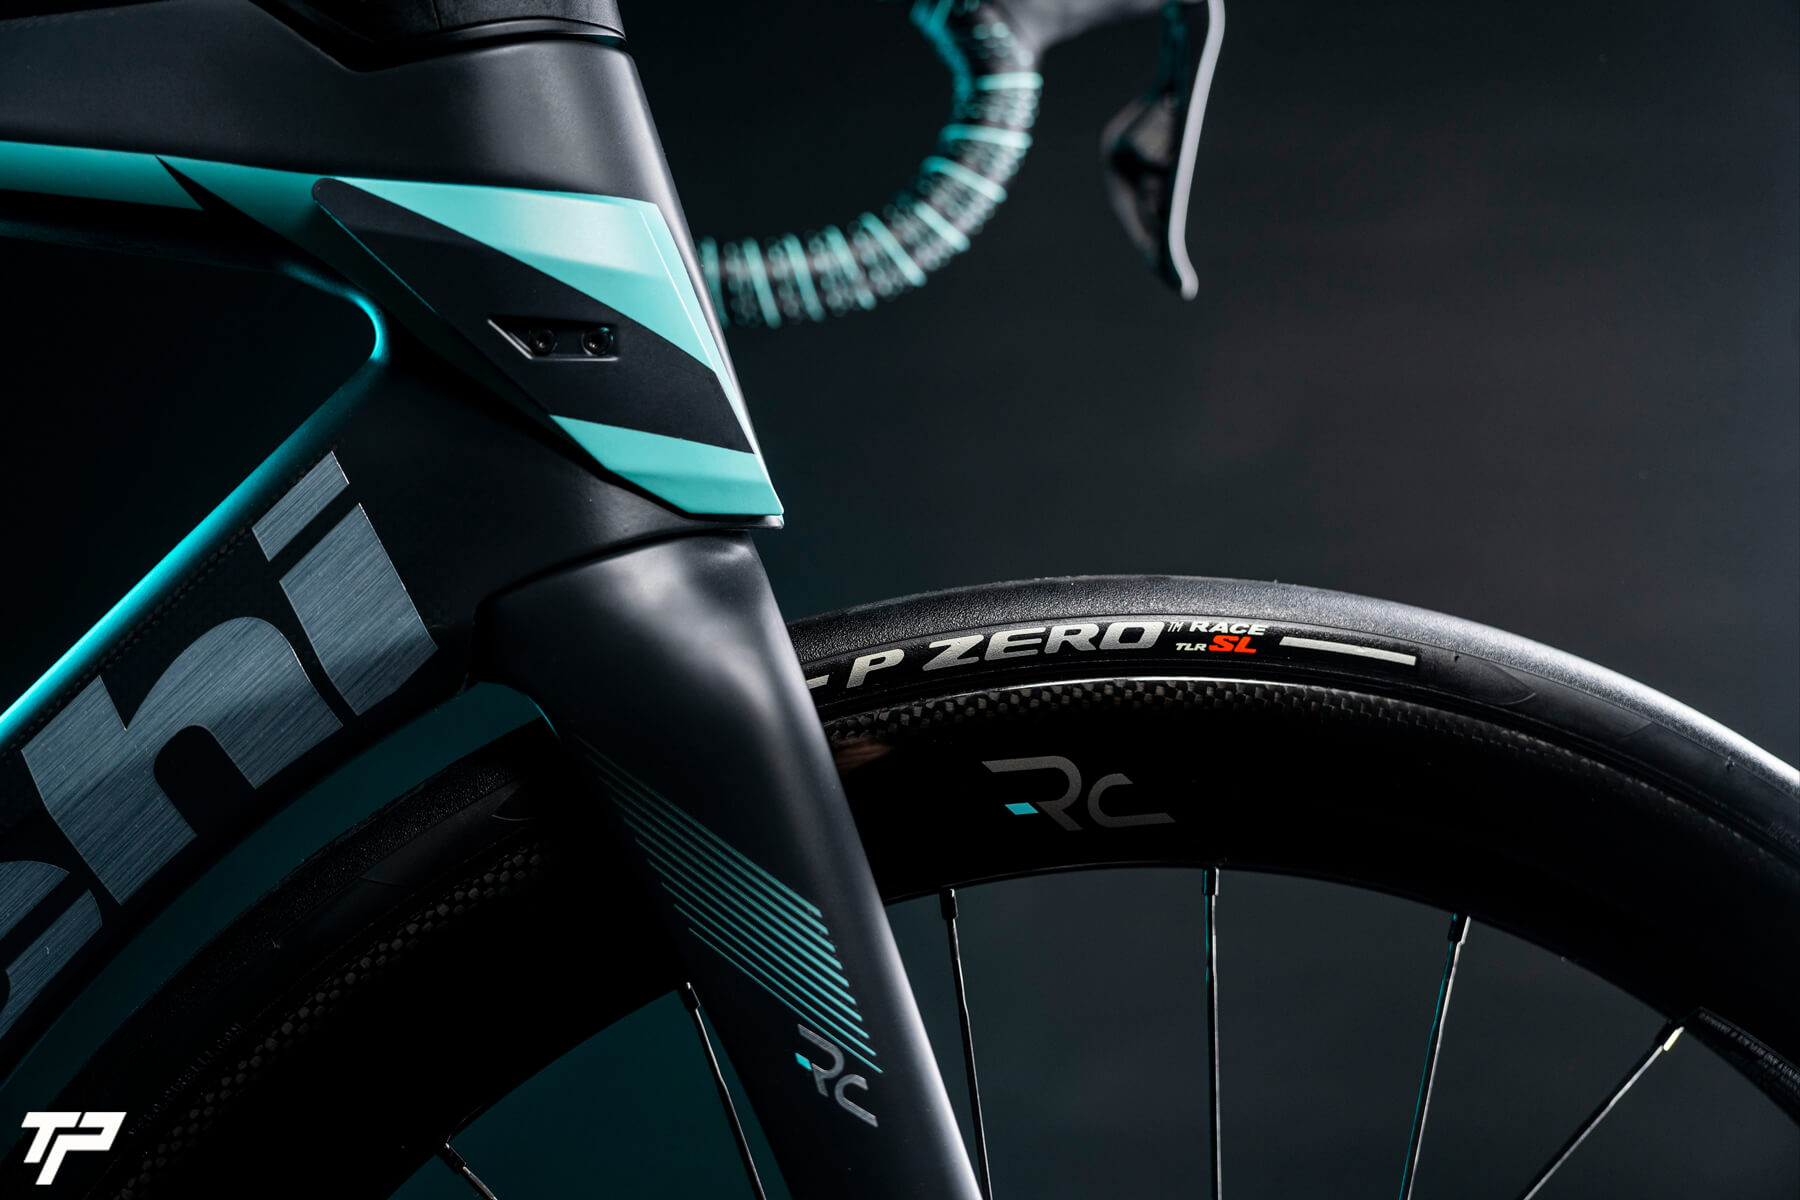 Bianchi Oltre RC: for those who simply want to go further